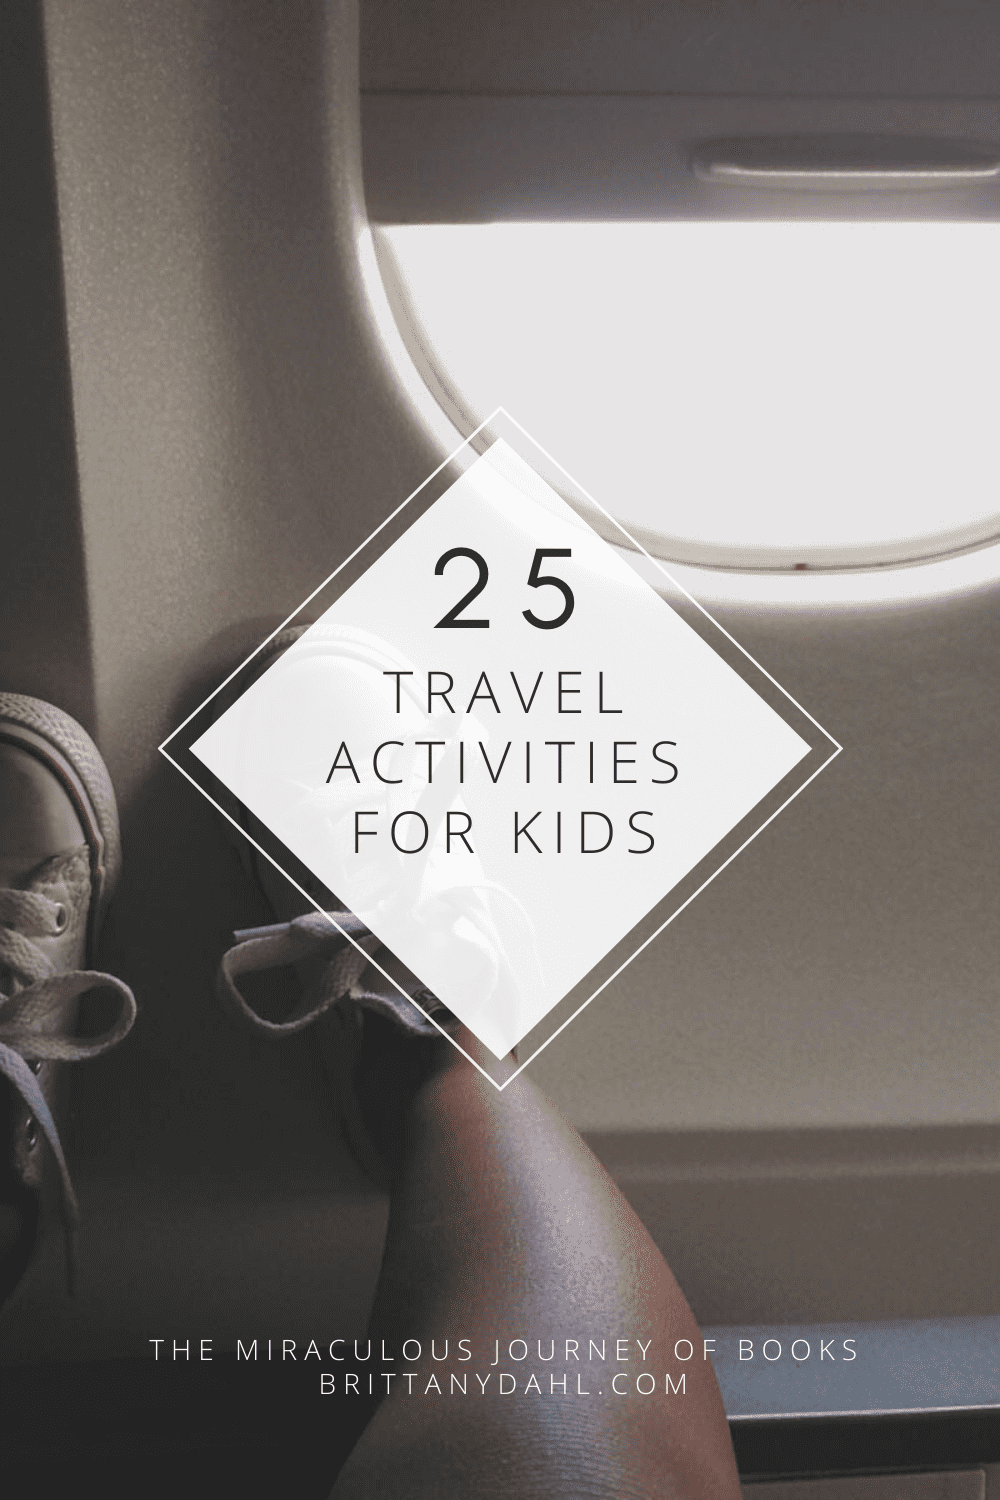 25 Travel Activities for Kids. Family vacation ideas that are screen-free. Image of small child's feet next to an airplane window.